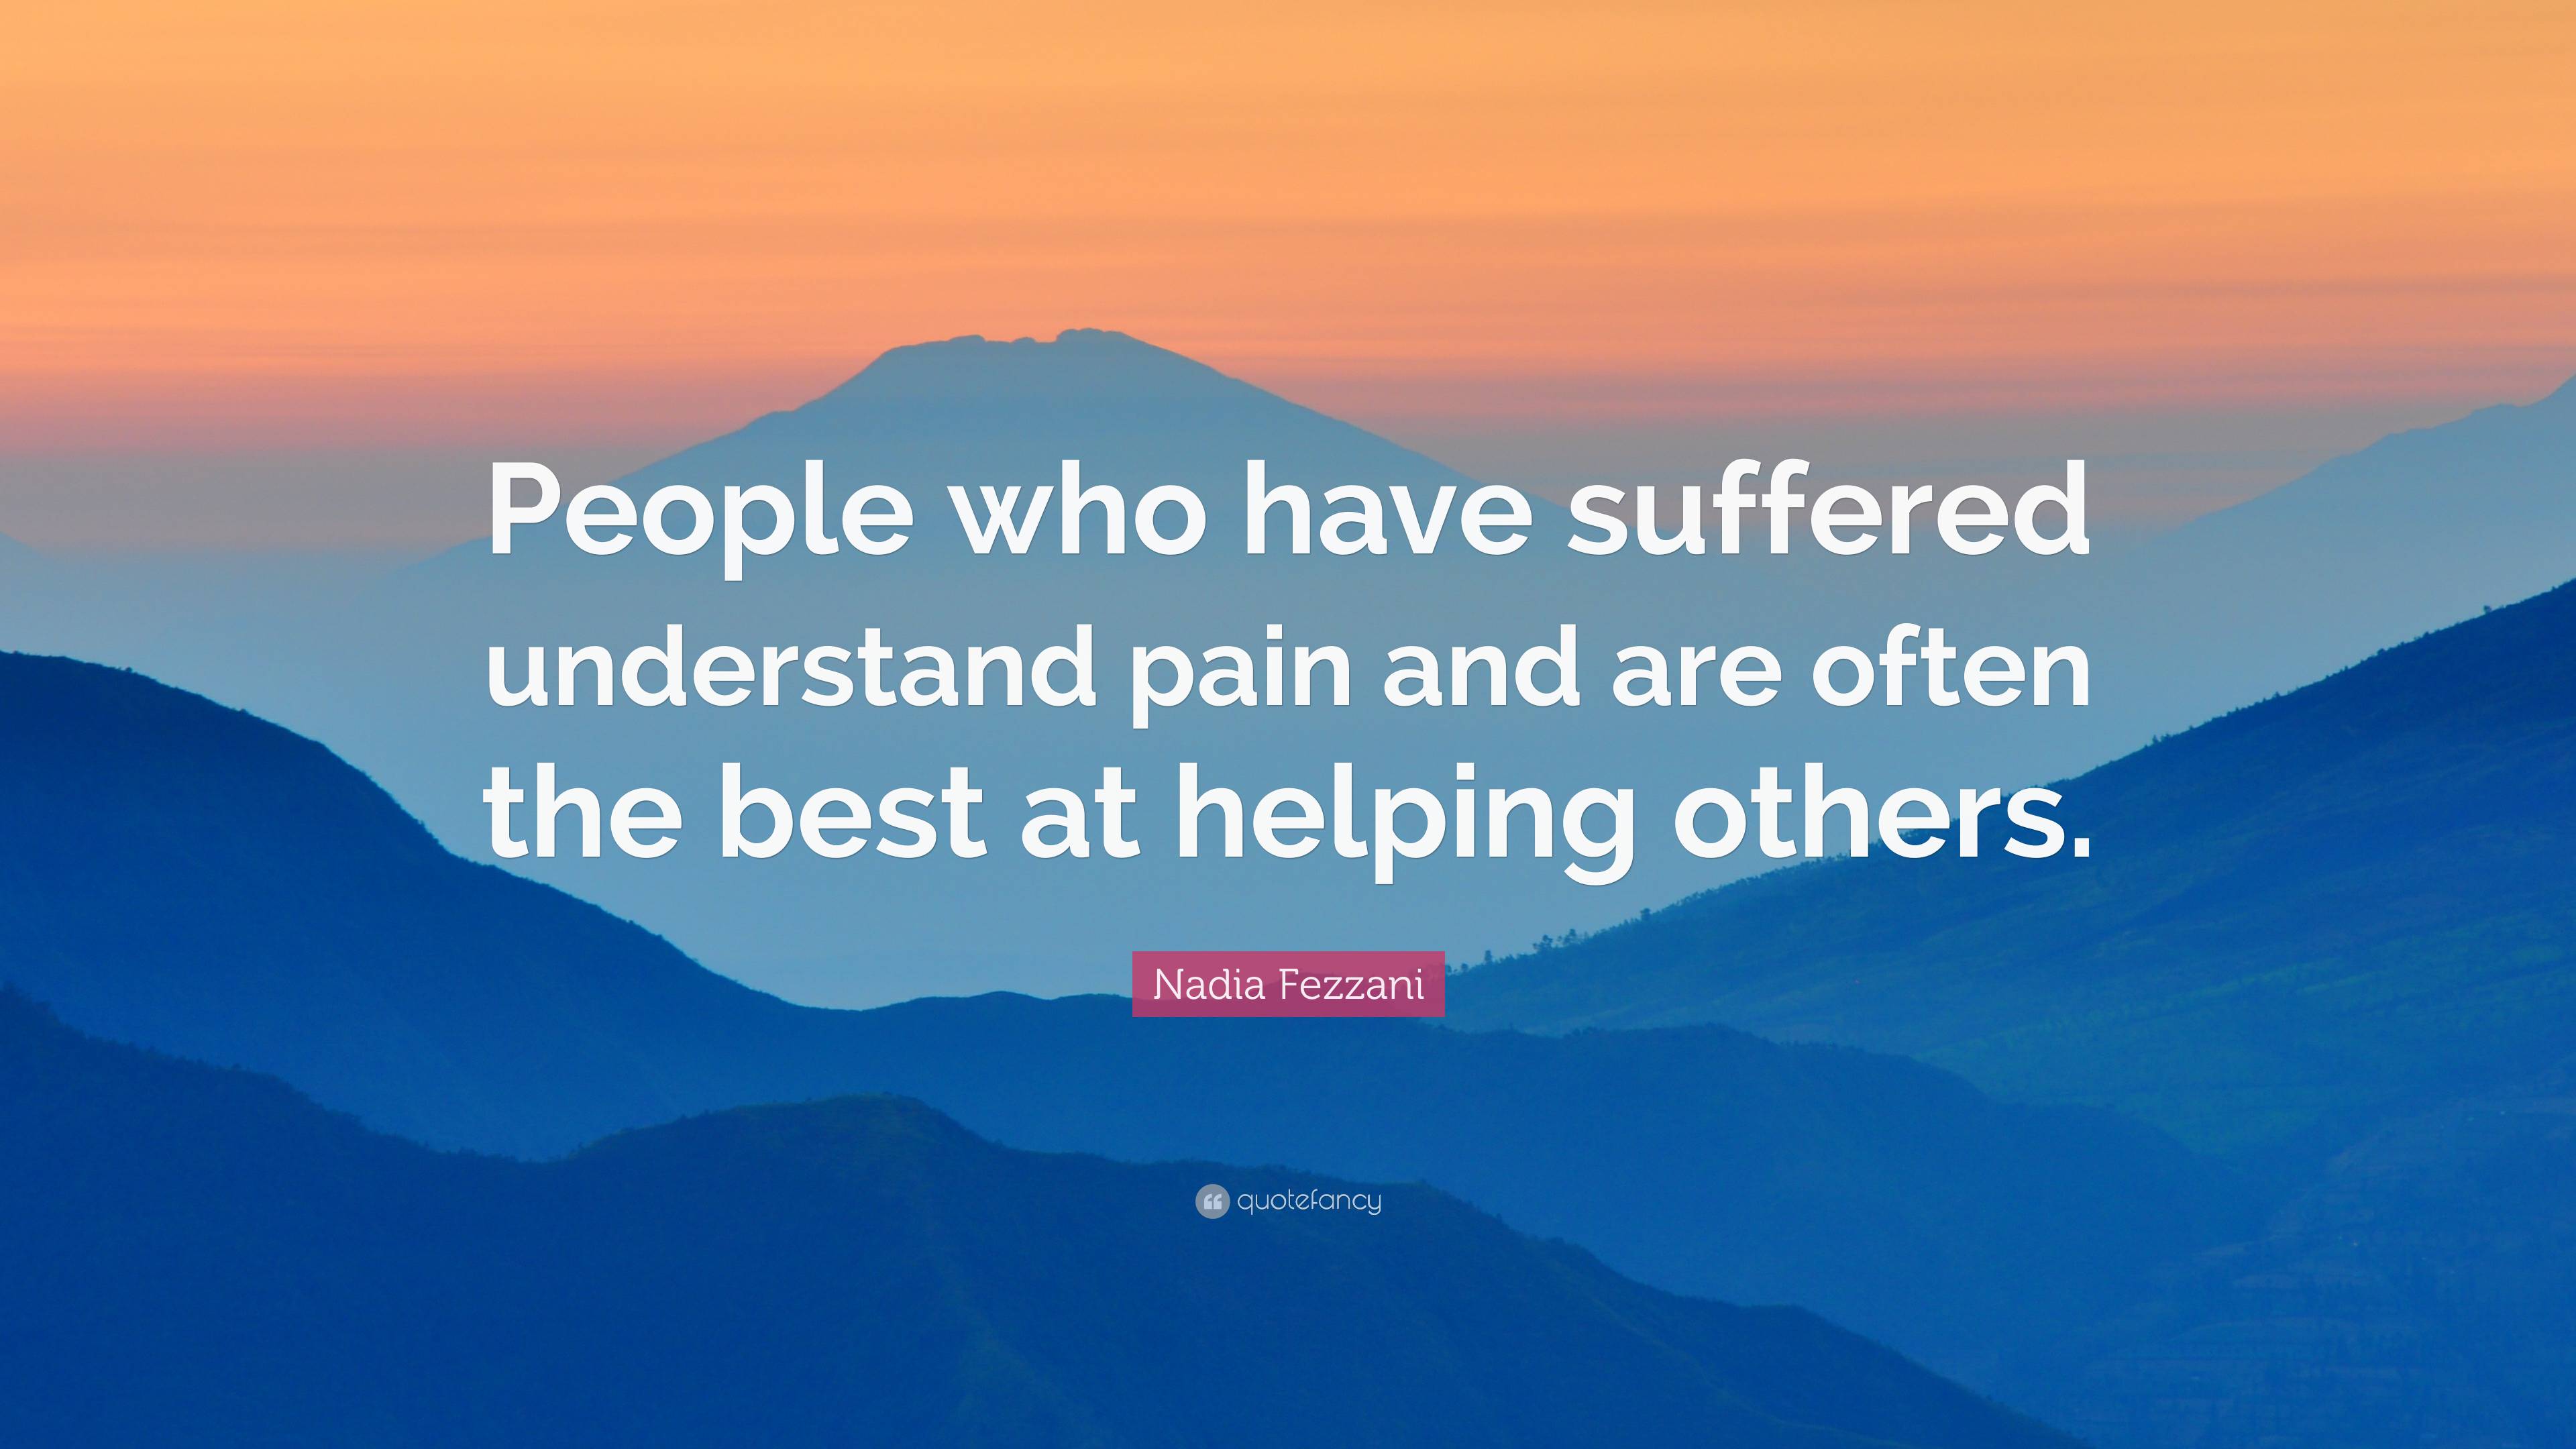 Nadia Fezzani Quote: “People who have suffered understand pain and are ...